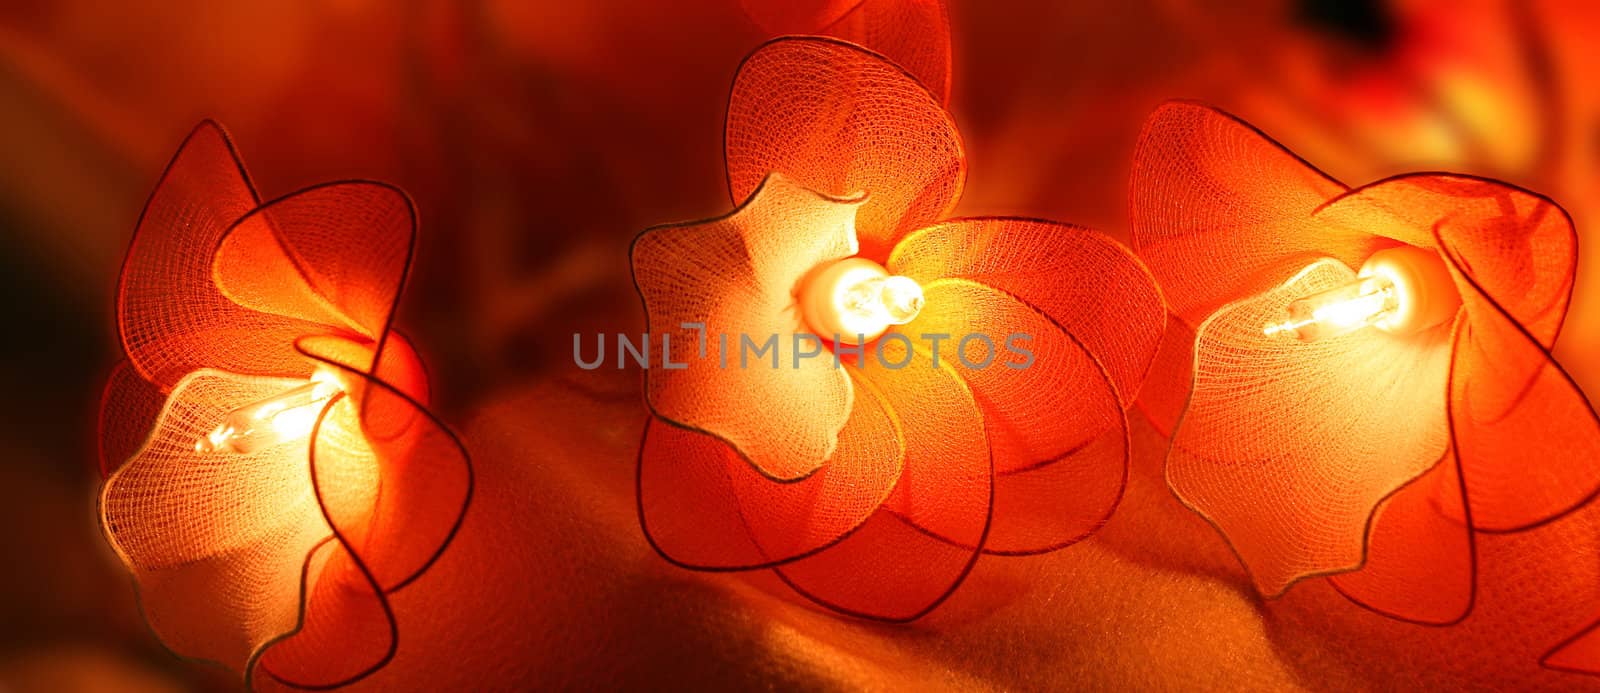 Decorative  flower-designed chinese  flashlights. Handmade, accomplished from  half-transparent fabric.  Softly  painted in orange and red. Making aura of well being and luck